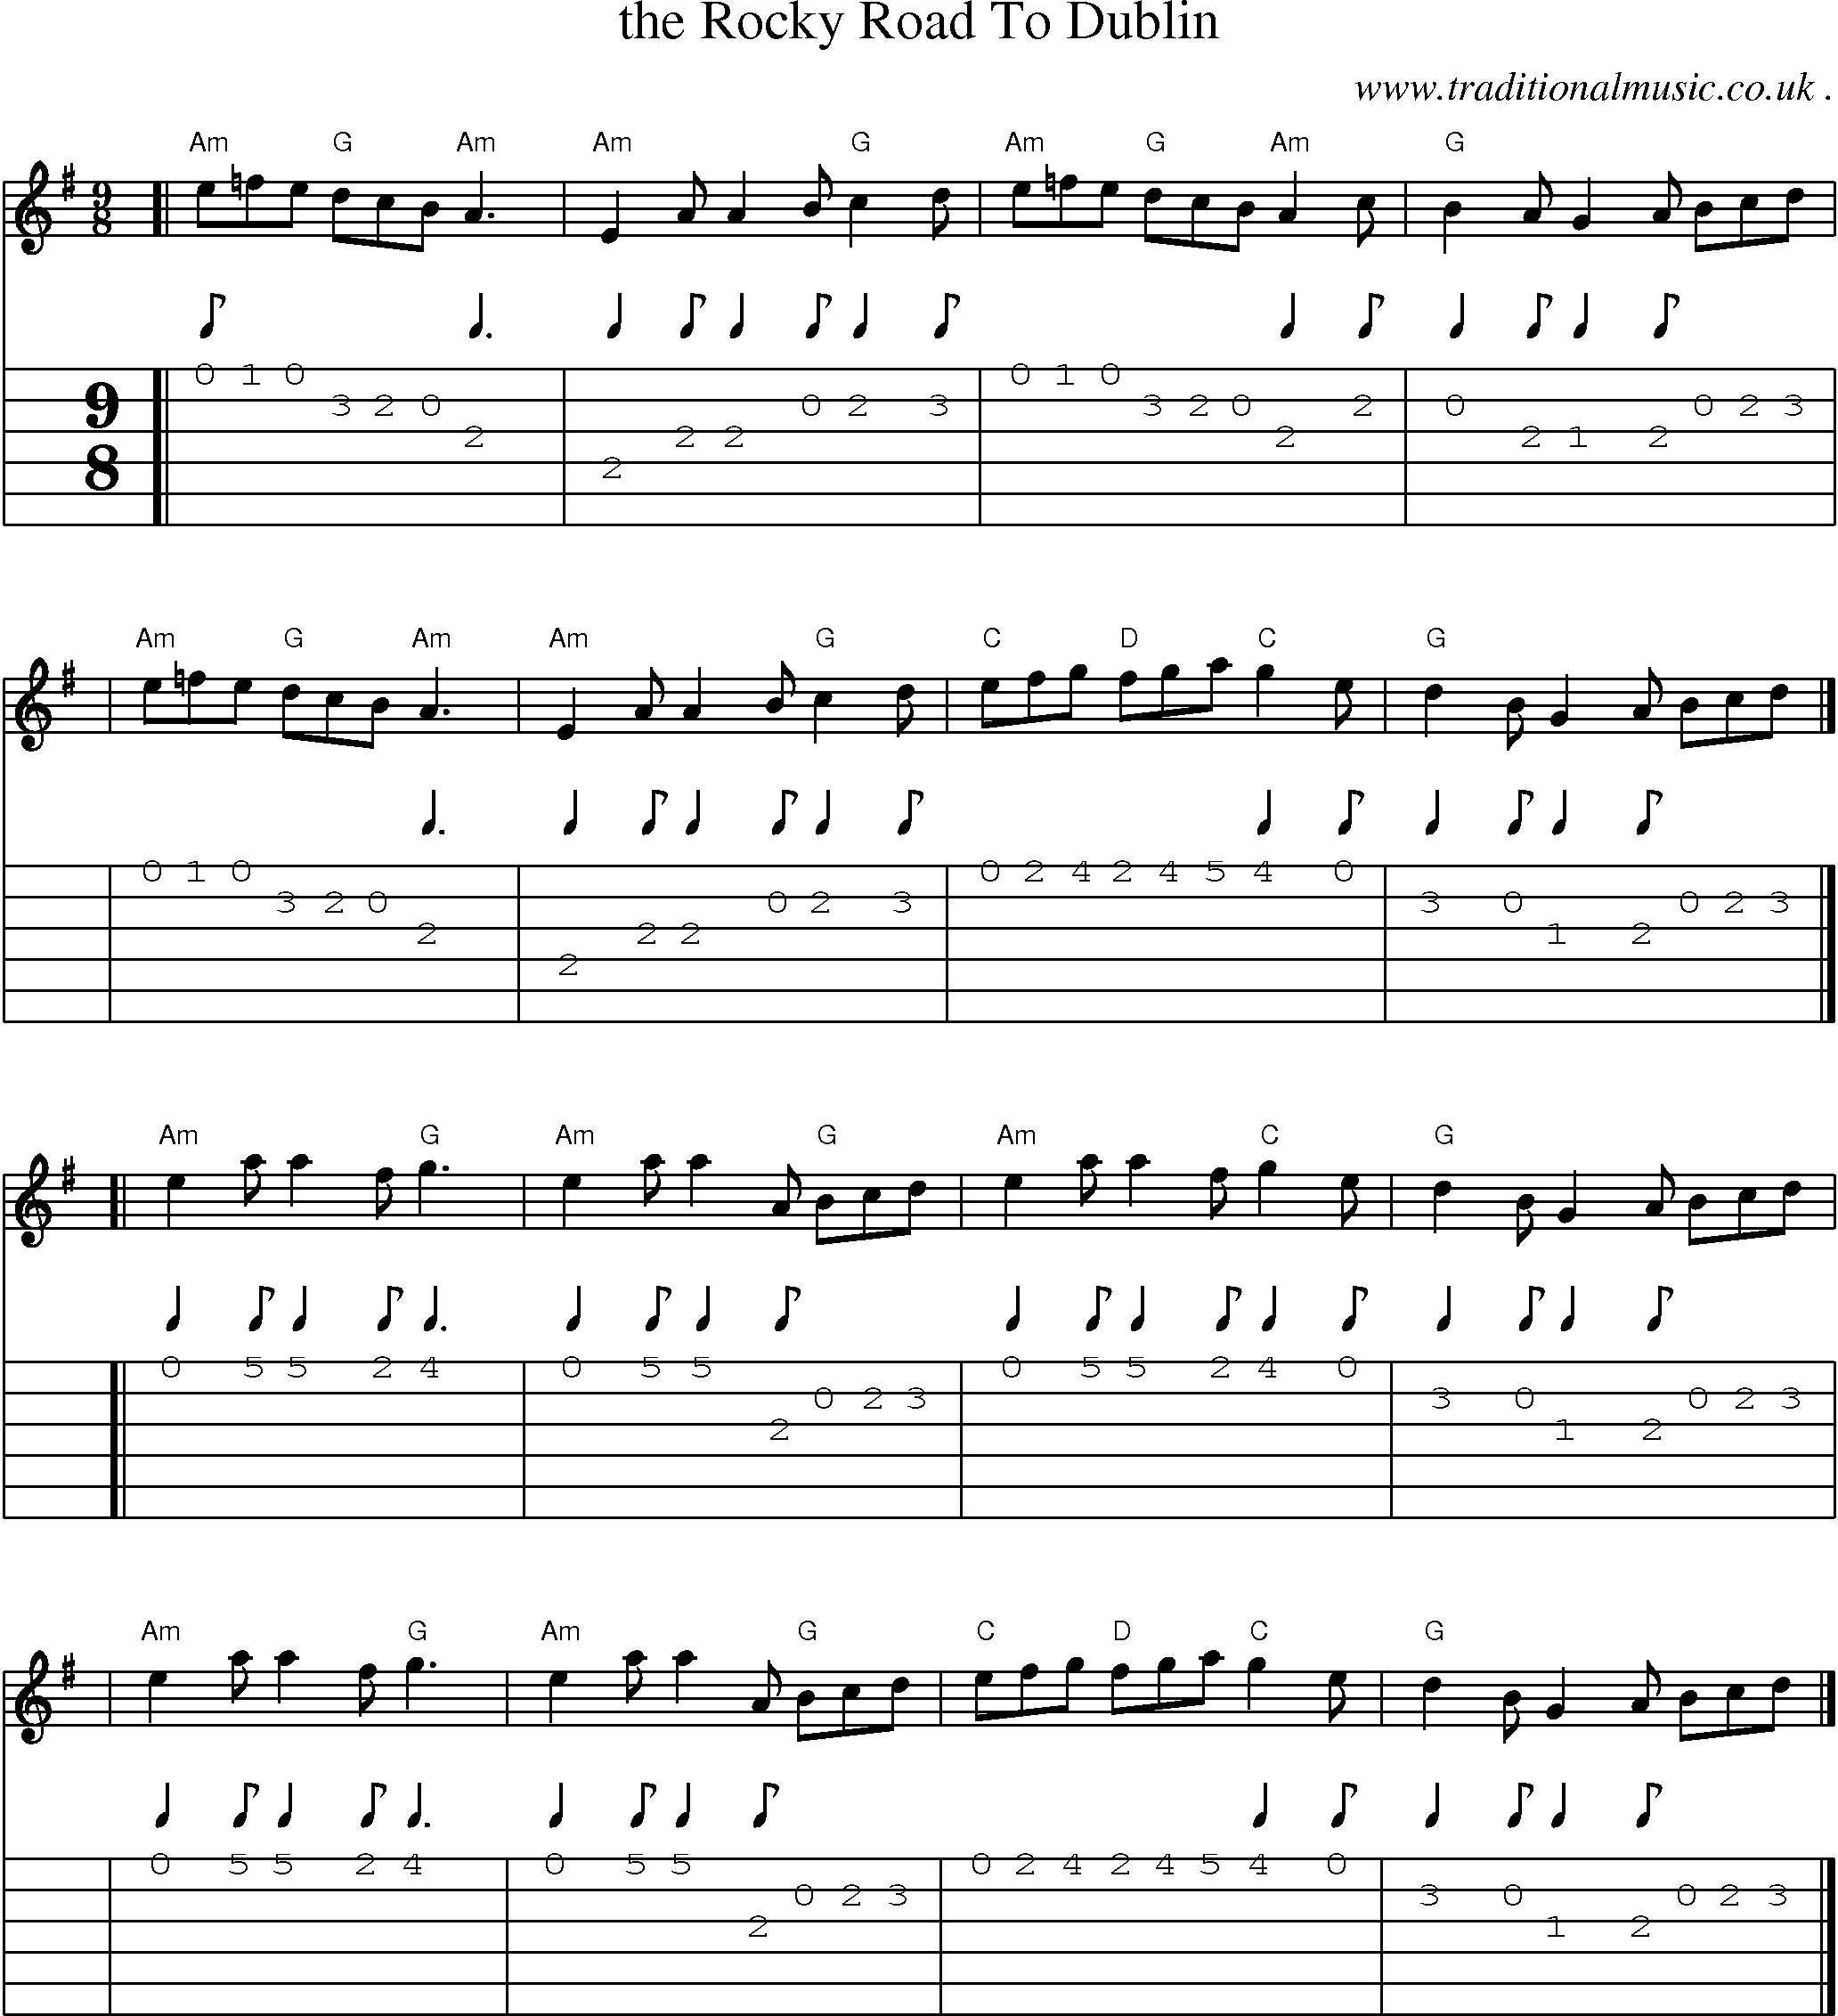 Sheet-music  score, Chords and Guitar Tabs for The Rocky Road To Dublin